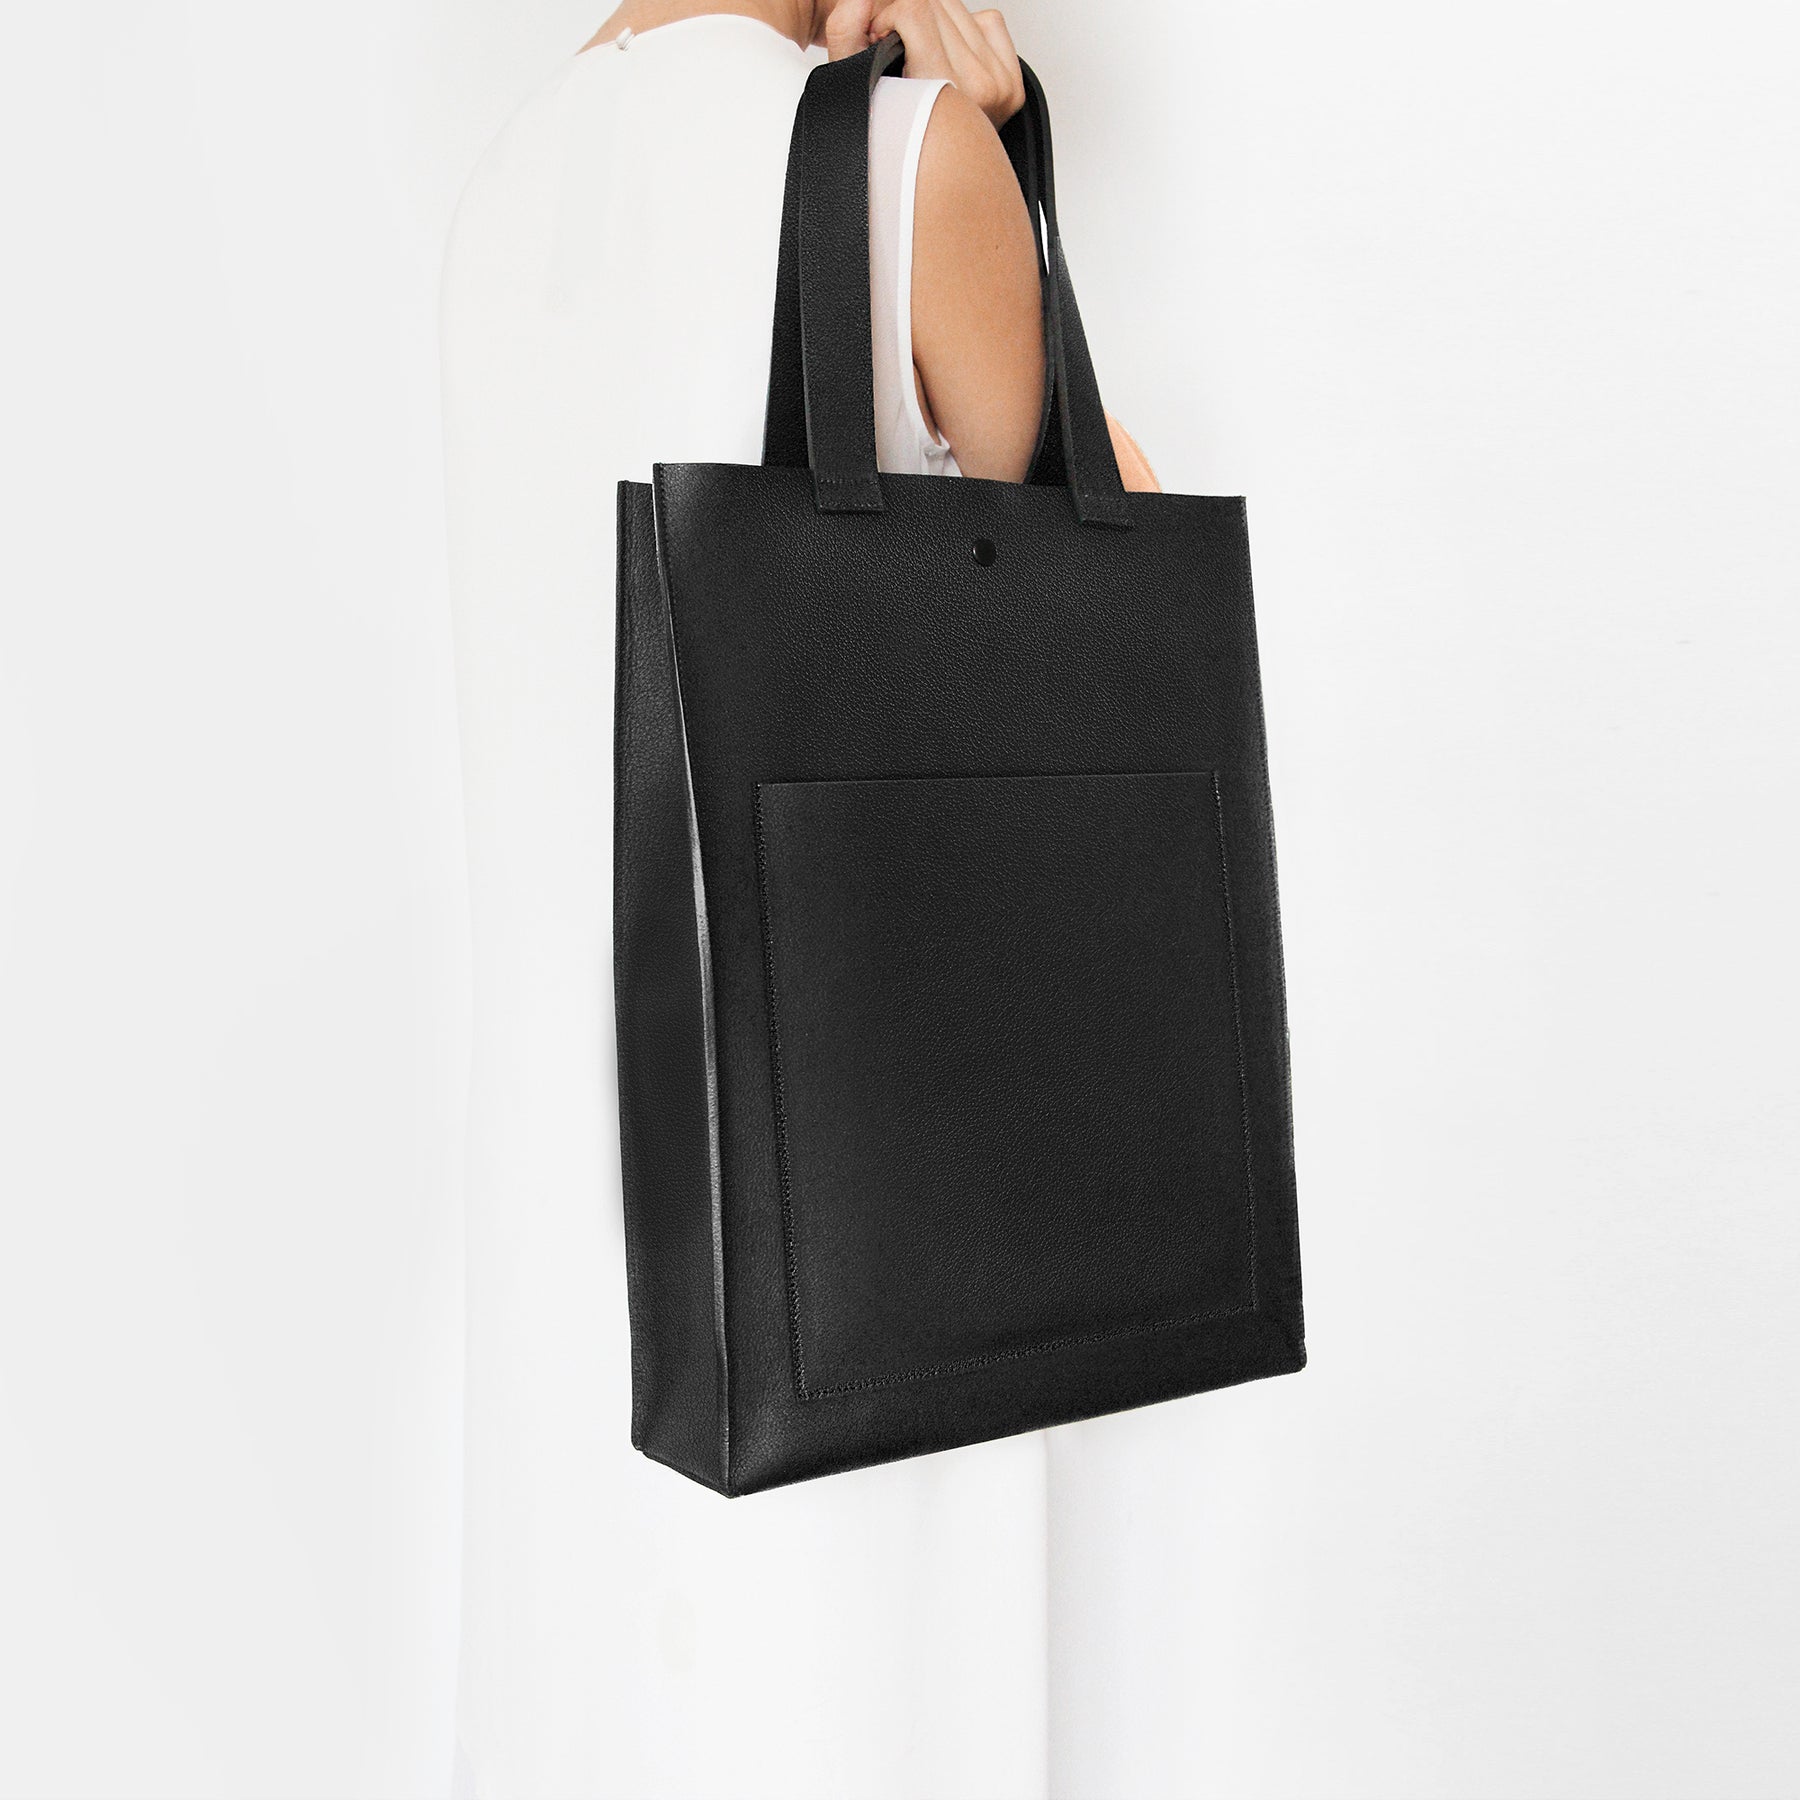 Tote – The Atelier YUL